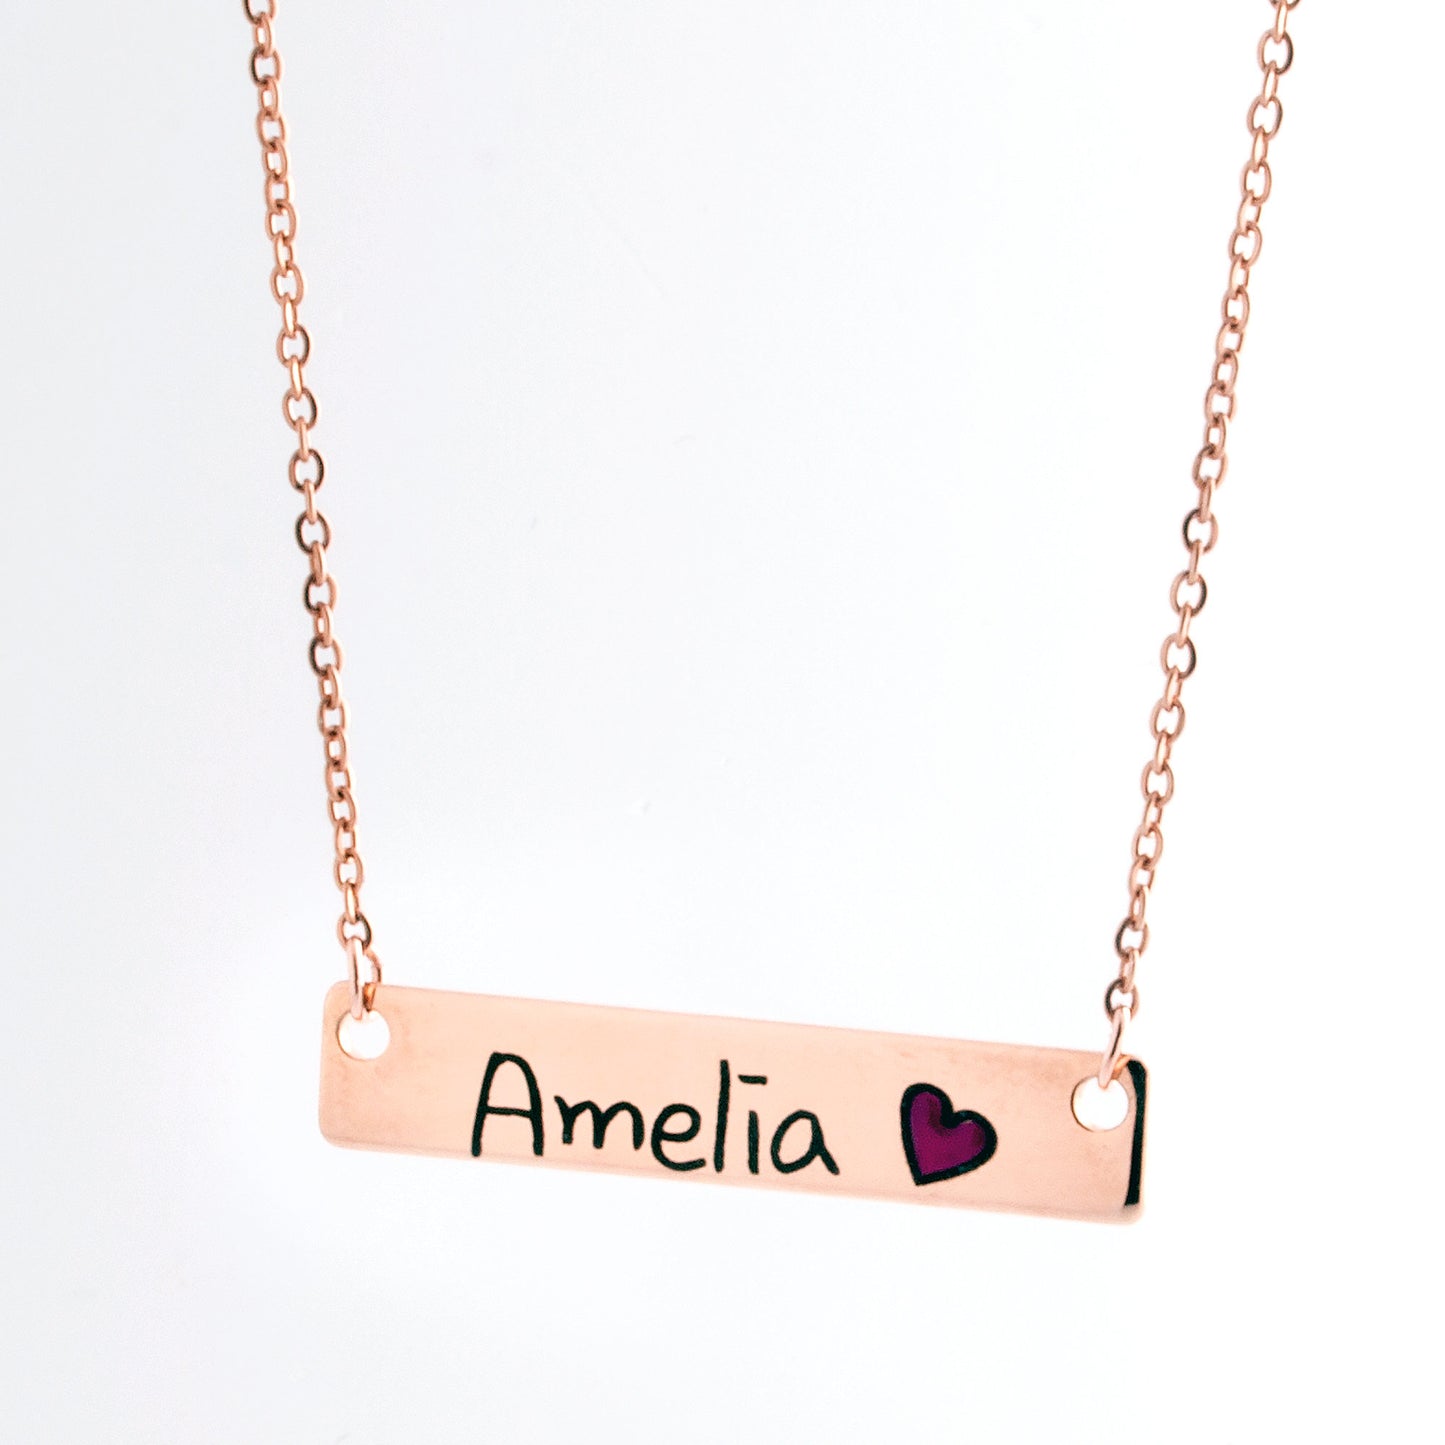 Buy Color Heart Name Bar Necklace at Petite Boutique 